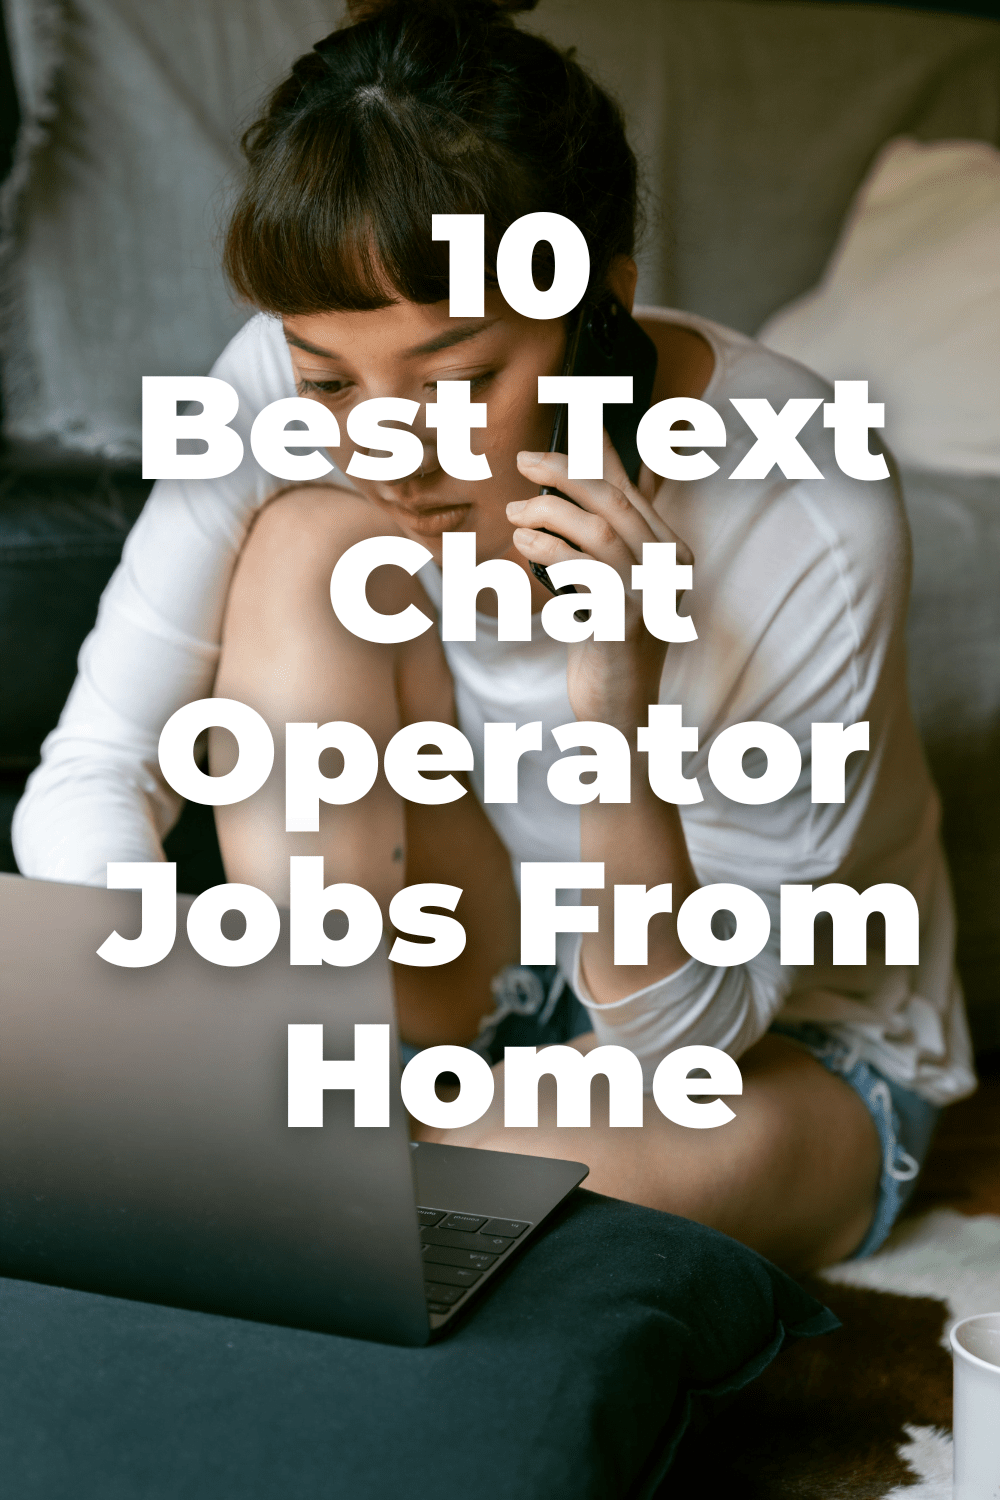 10 Best Text Chat Operator Jobs From Home